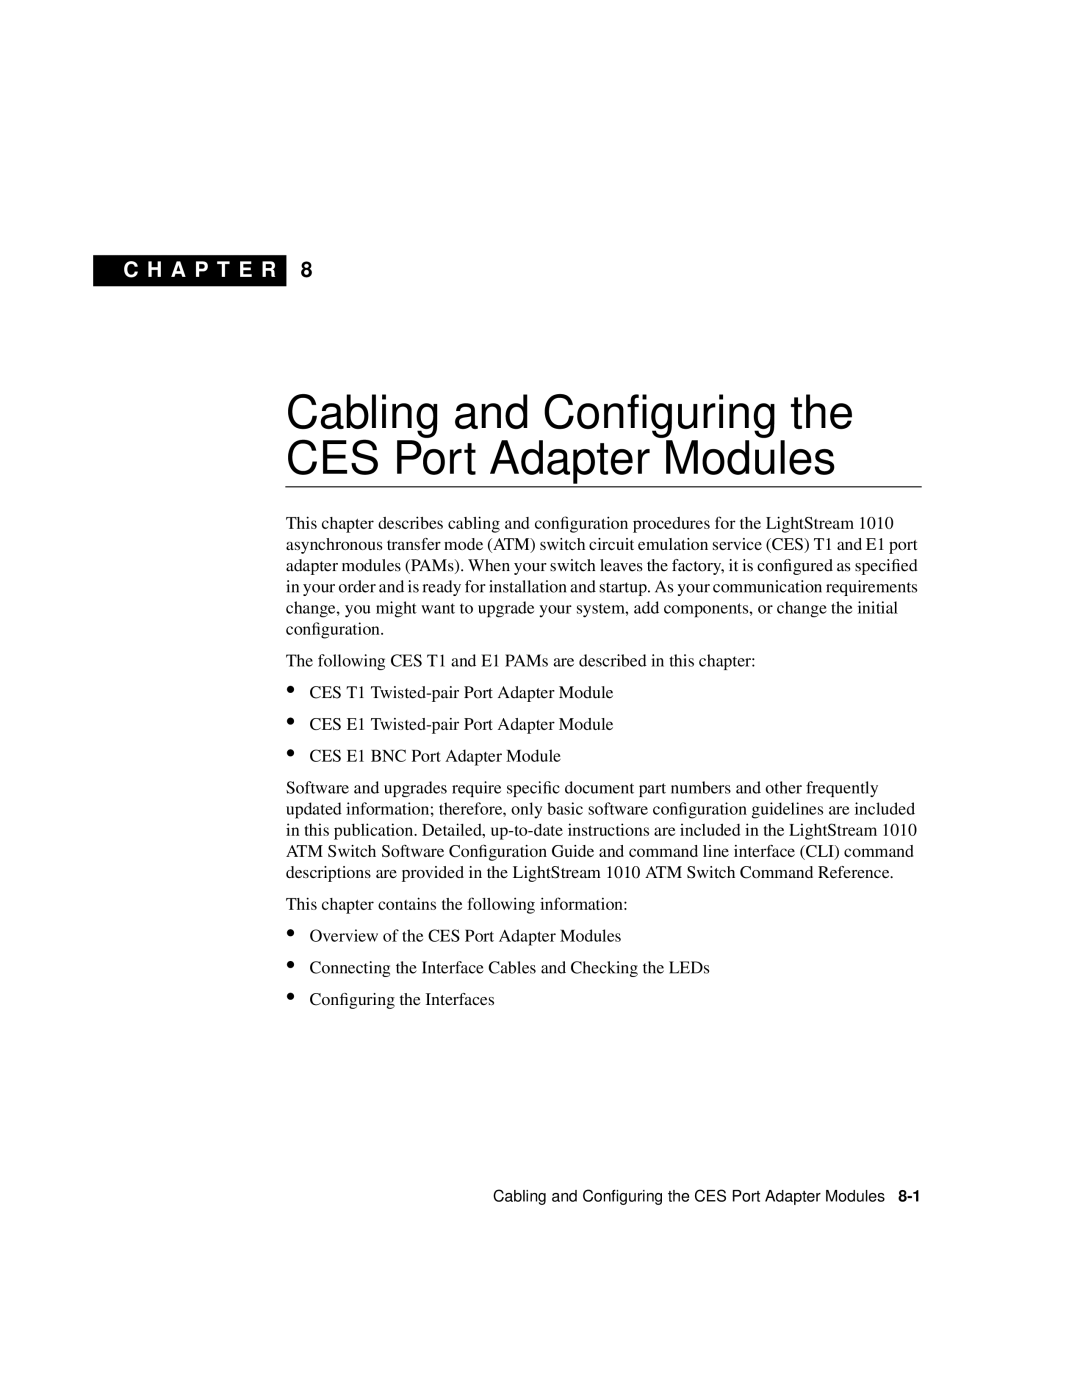 Cisco Systems 1010 manual Cabling and Configuring the CES Port Adapter Modules, C H A P T E R 